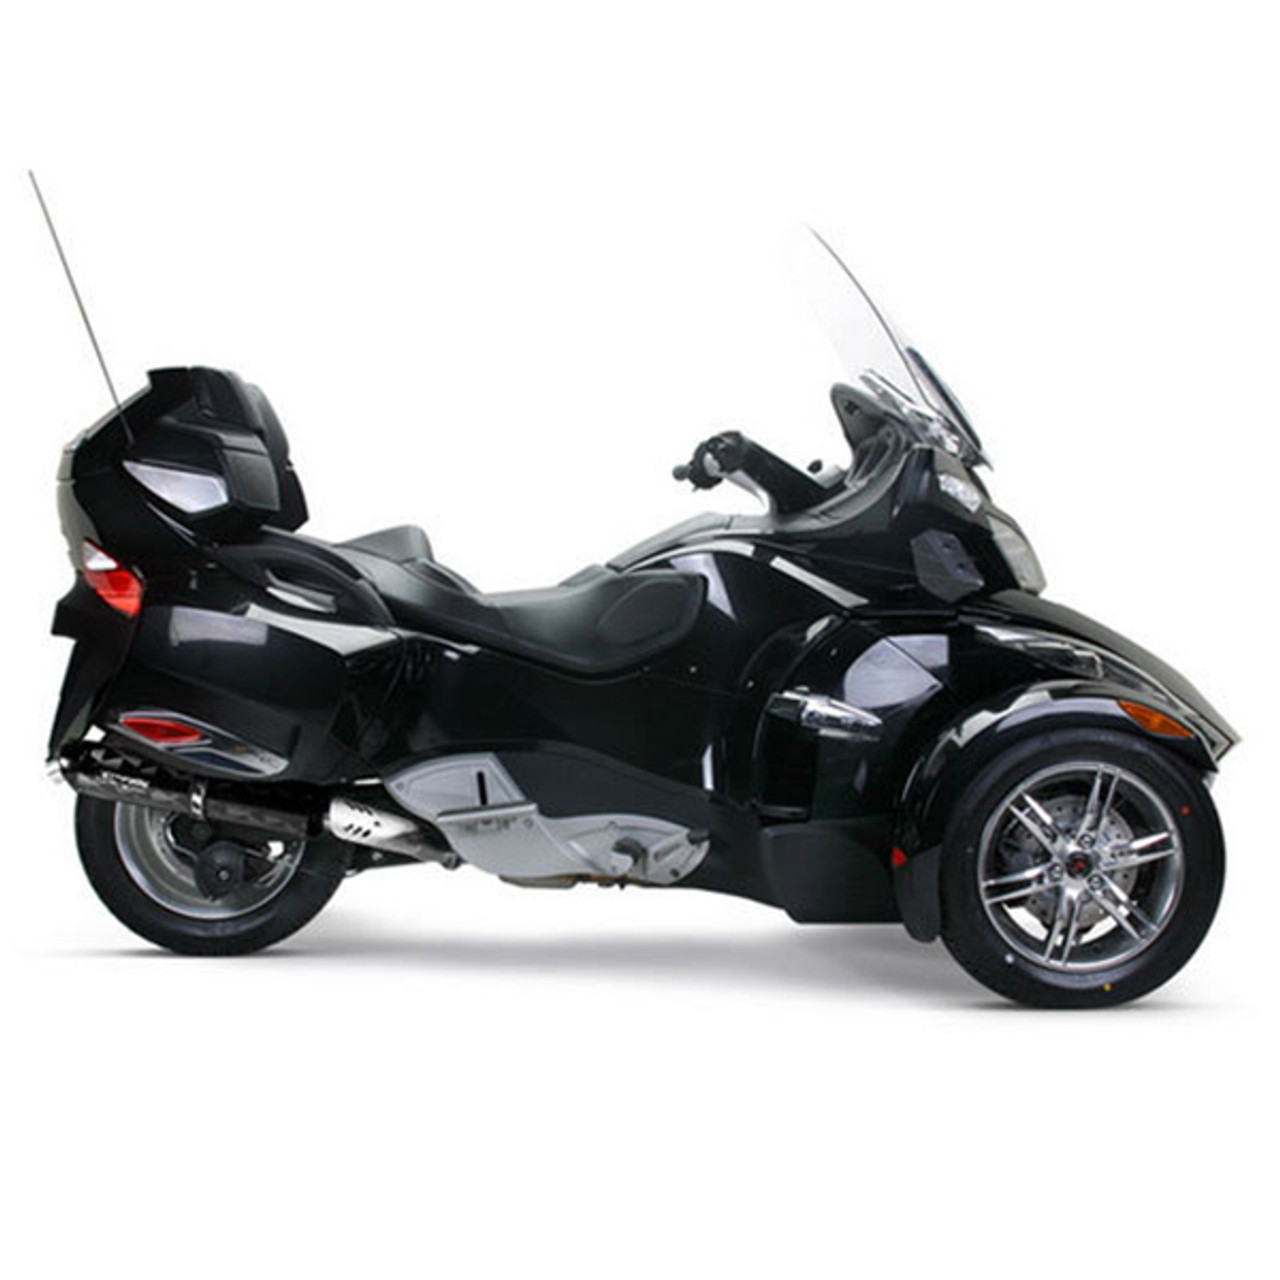 2012 Can-Am Spyder RS-S Review